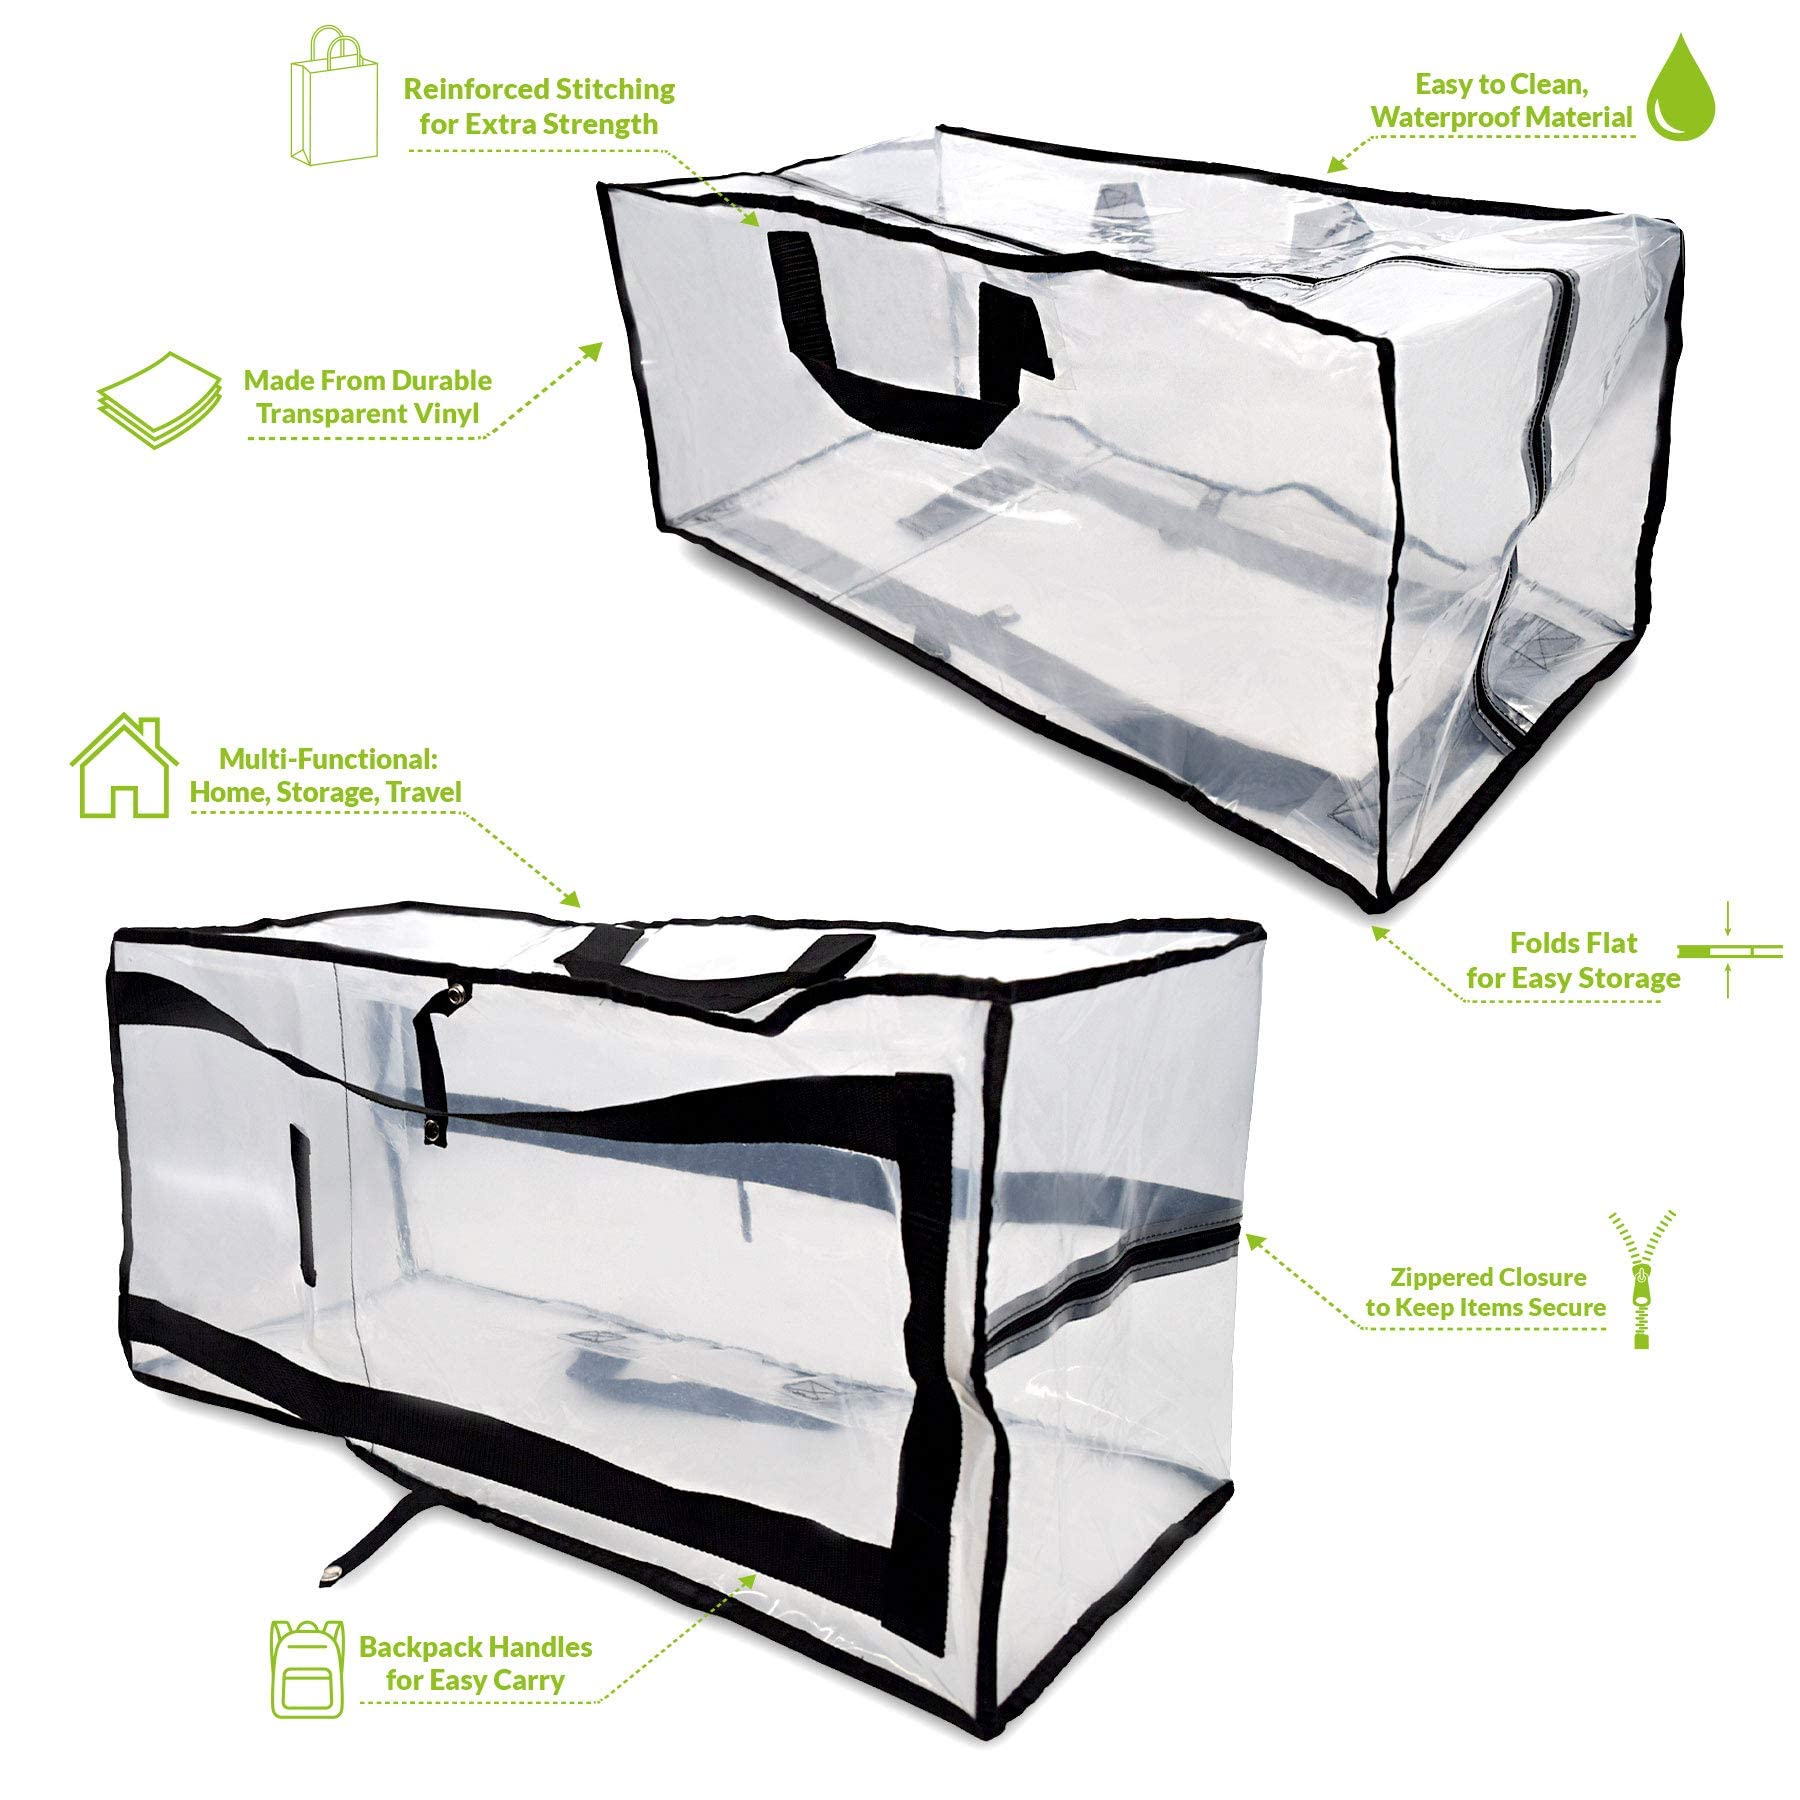 Clear Storage Bags - 3 Pack Zippered Moving Bags, See Thru Transparent Heavy Duty Totes with Handles, Large & Waterproof for Clothes, Blankets, Linens, Packing, Organizing, Under Bed - 27x12x13.75  - Good